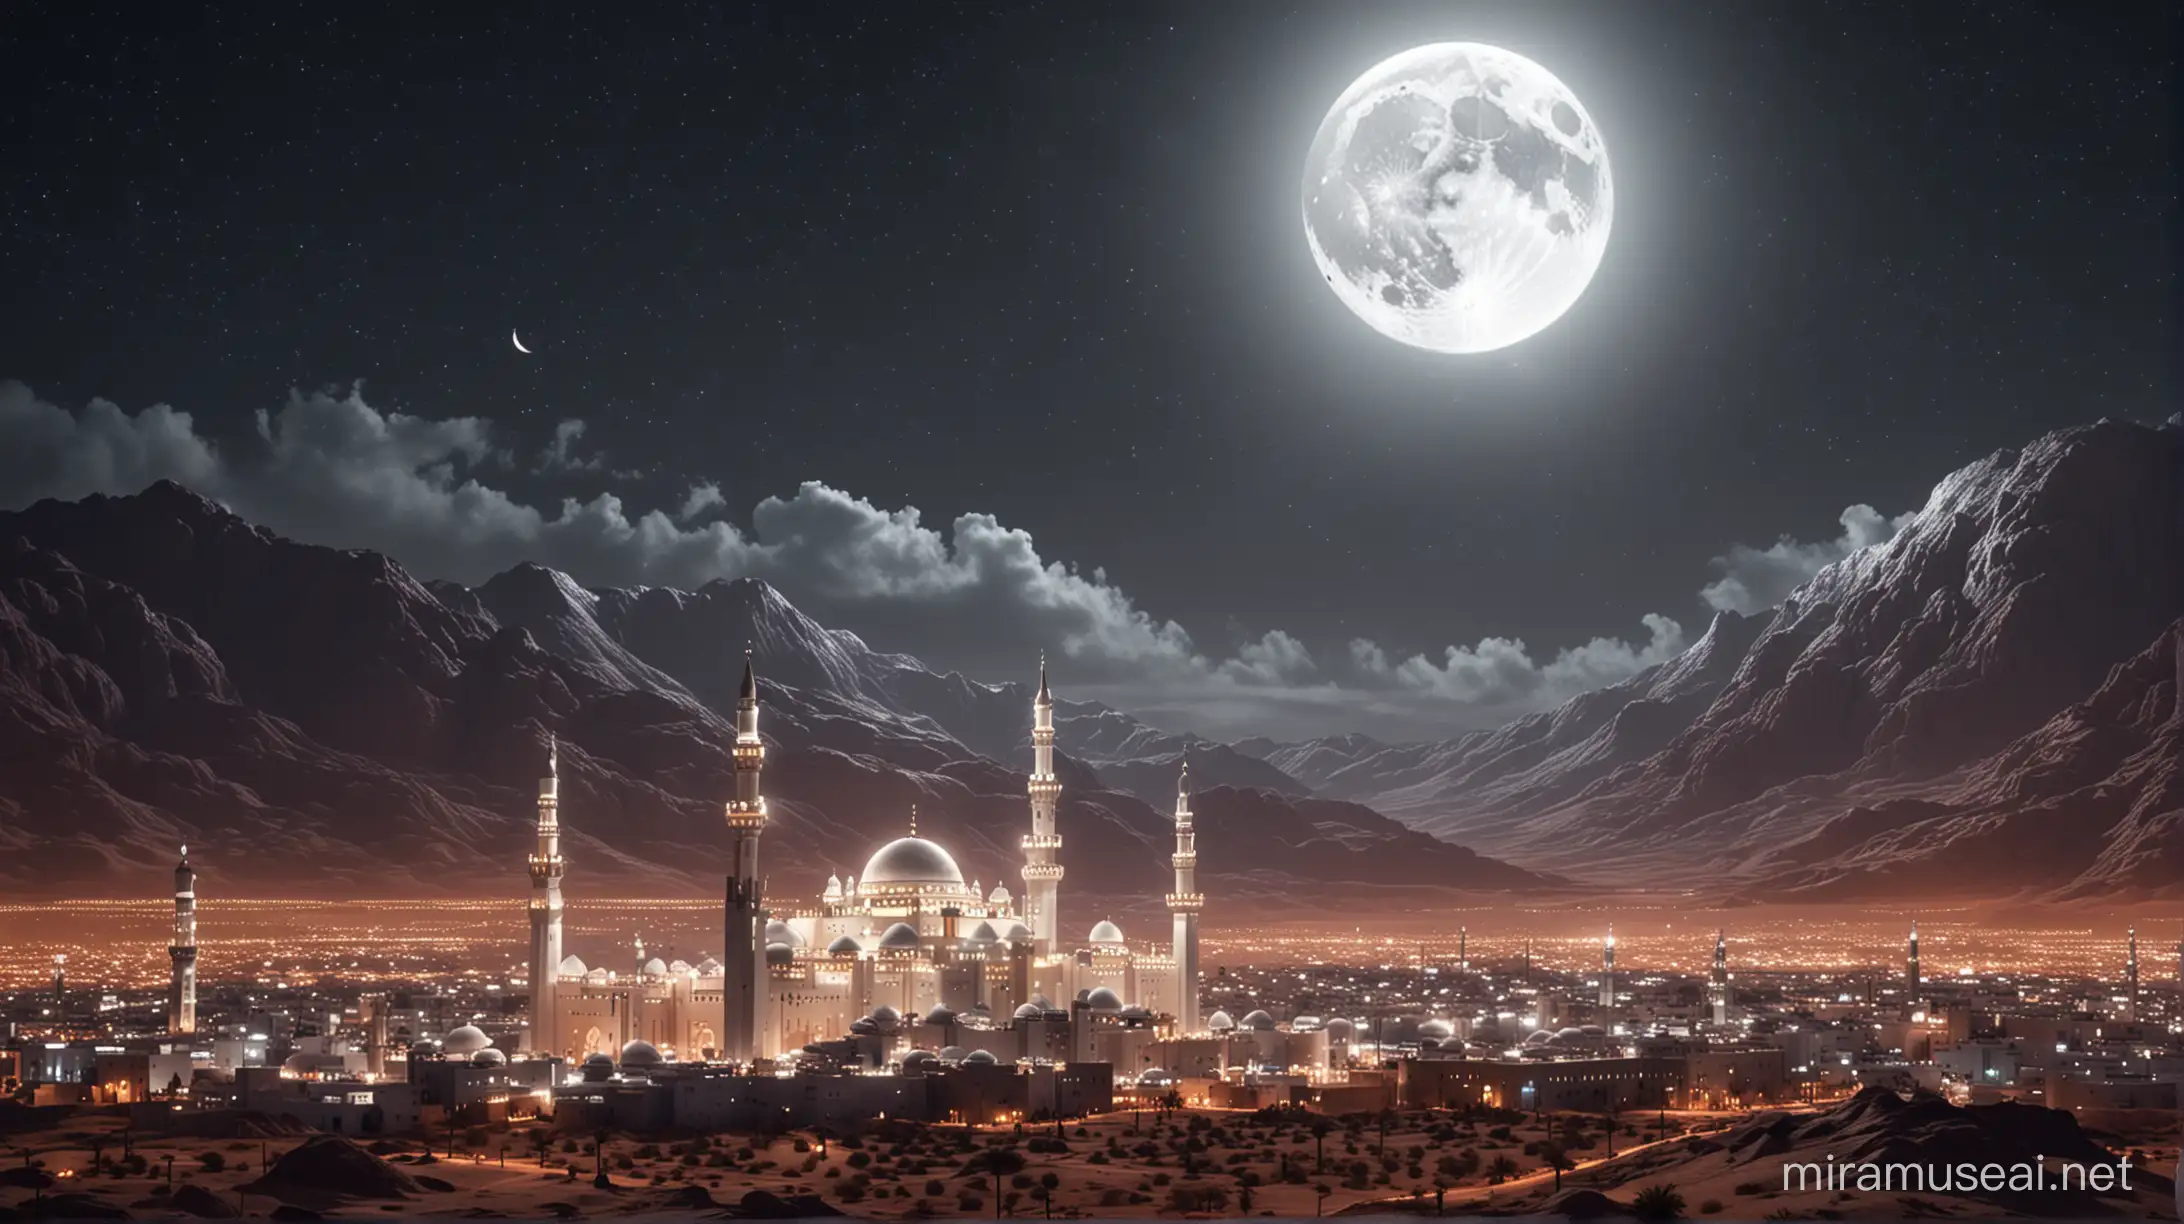 Realistic Madinah Mosque Landscape with Neon Moon and Desert Shadows